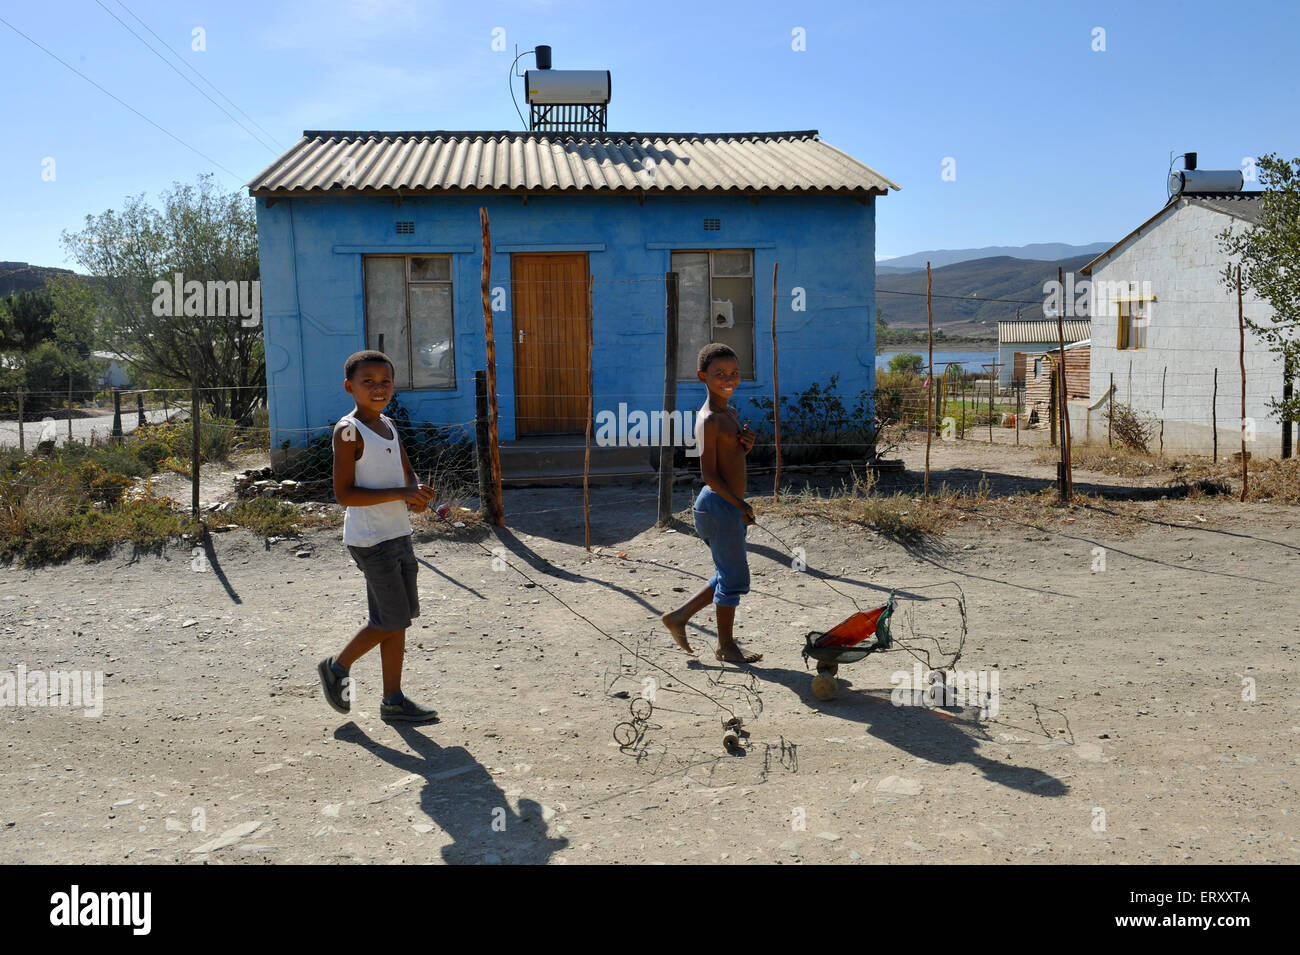 Boys play with homemade toys in the township of Barrydale, Western Cape, South Africa Stock Photo